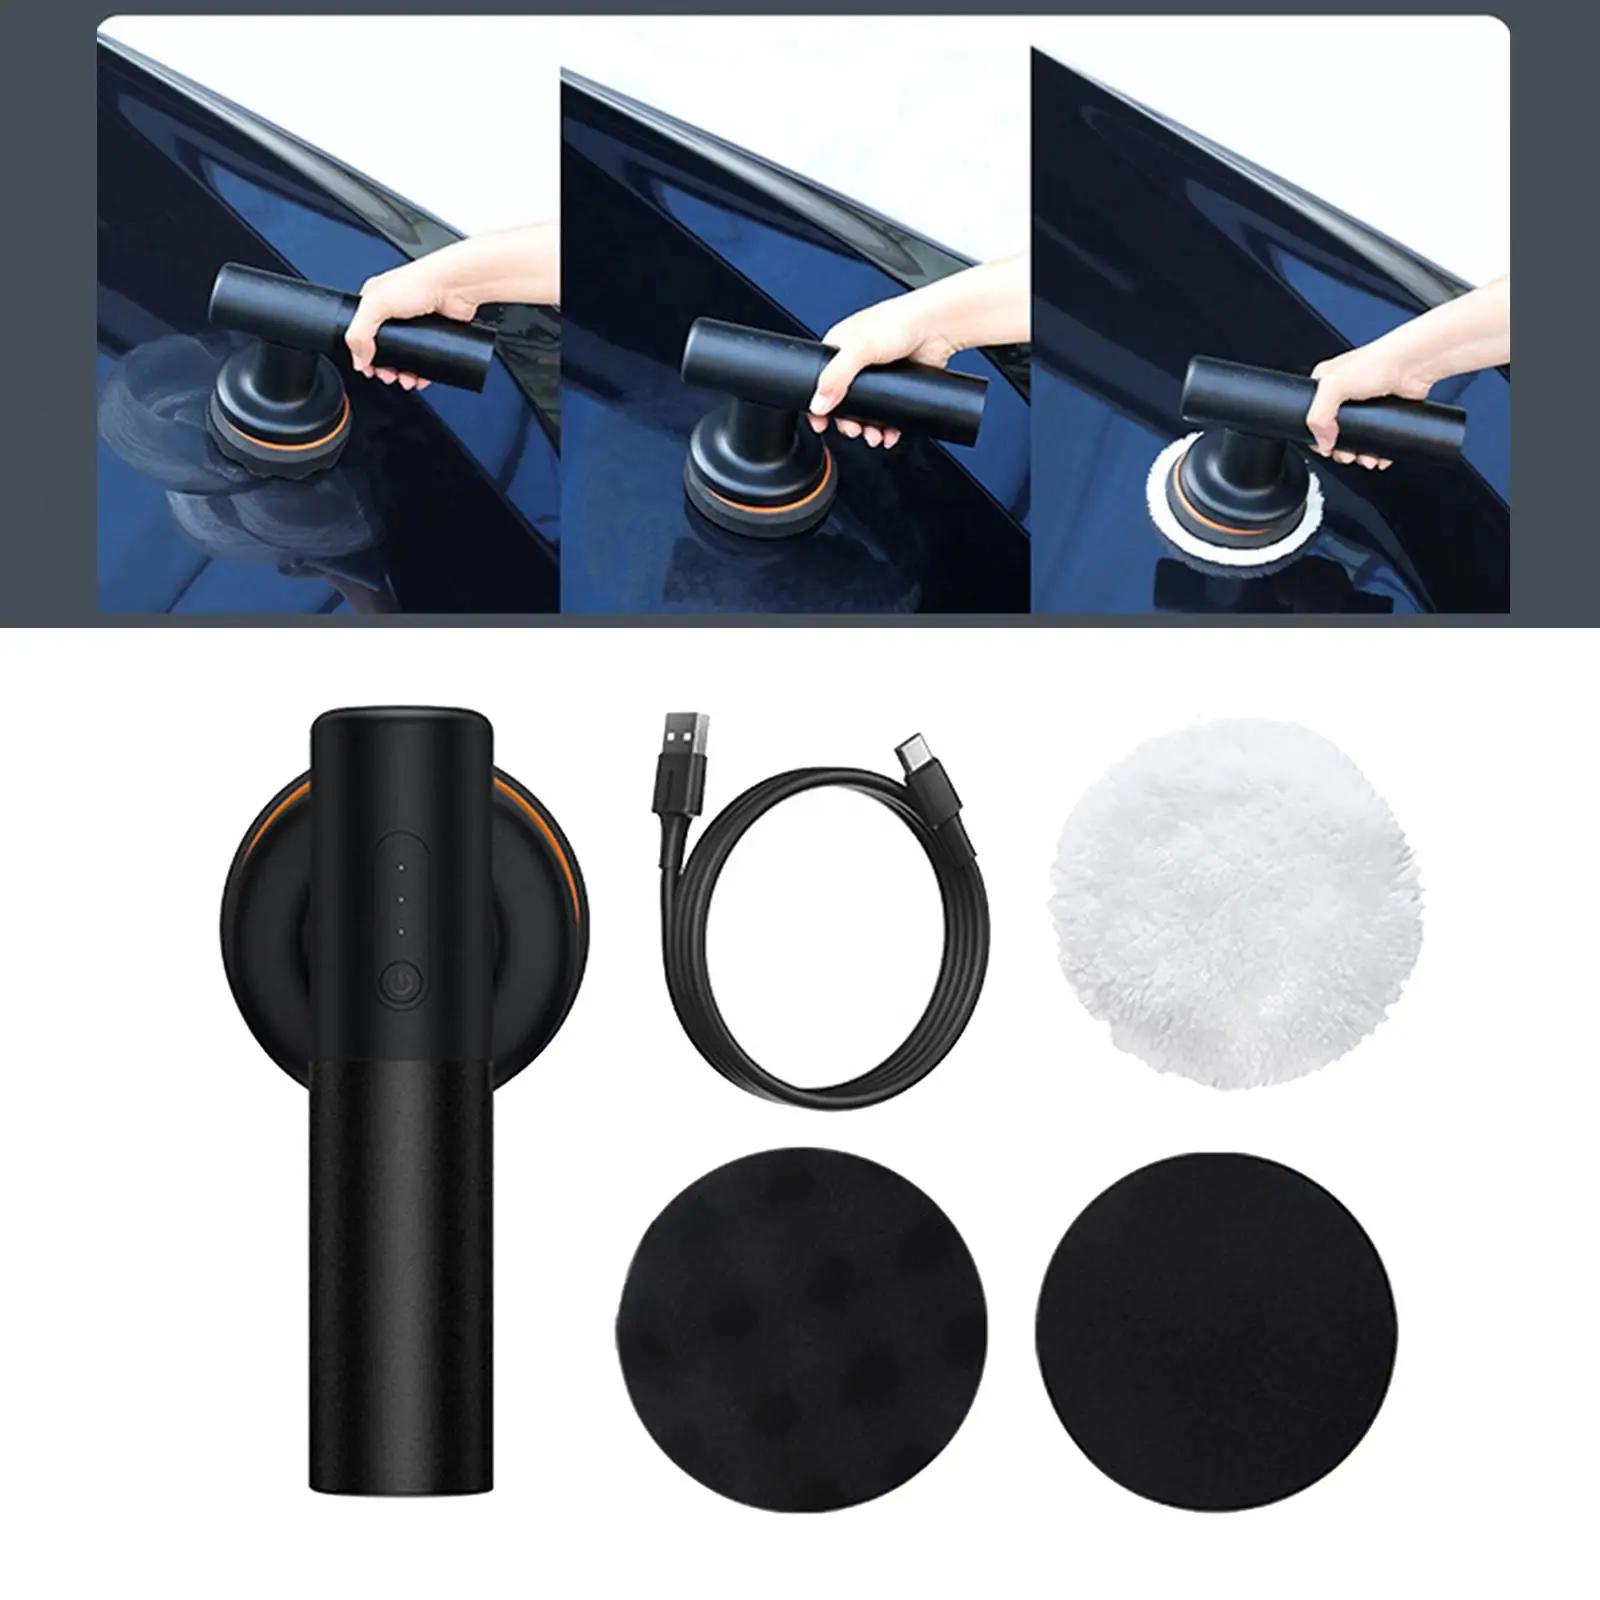 Car Electric Polisher Buffing W/ Pad Buffer for Car Detailing Fit for Furniture